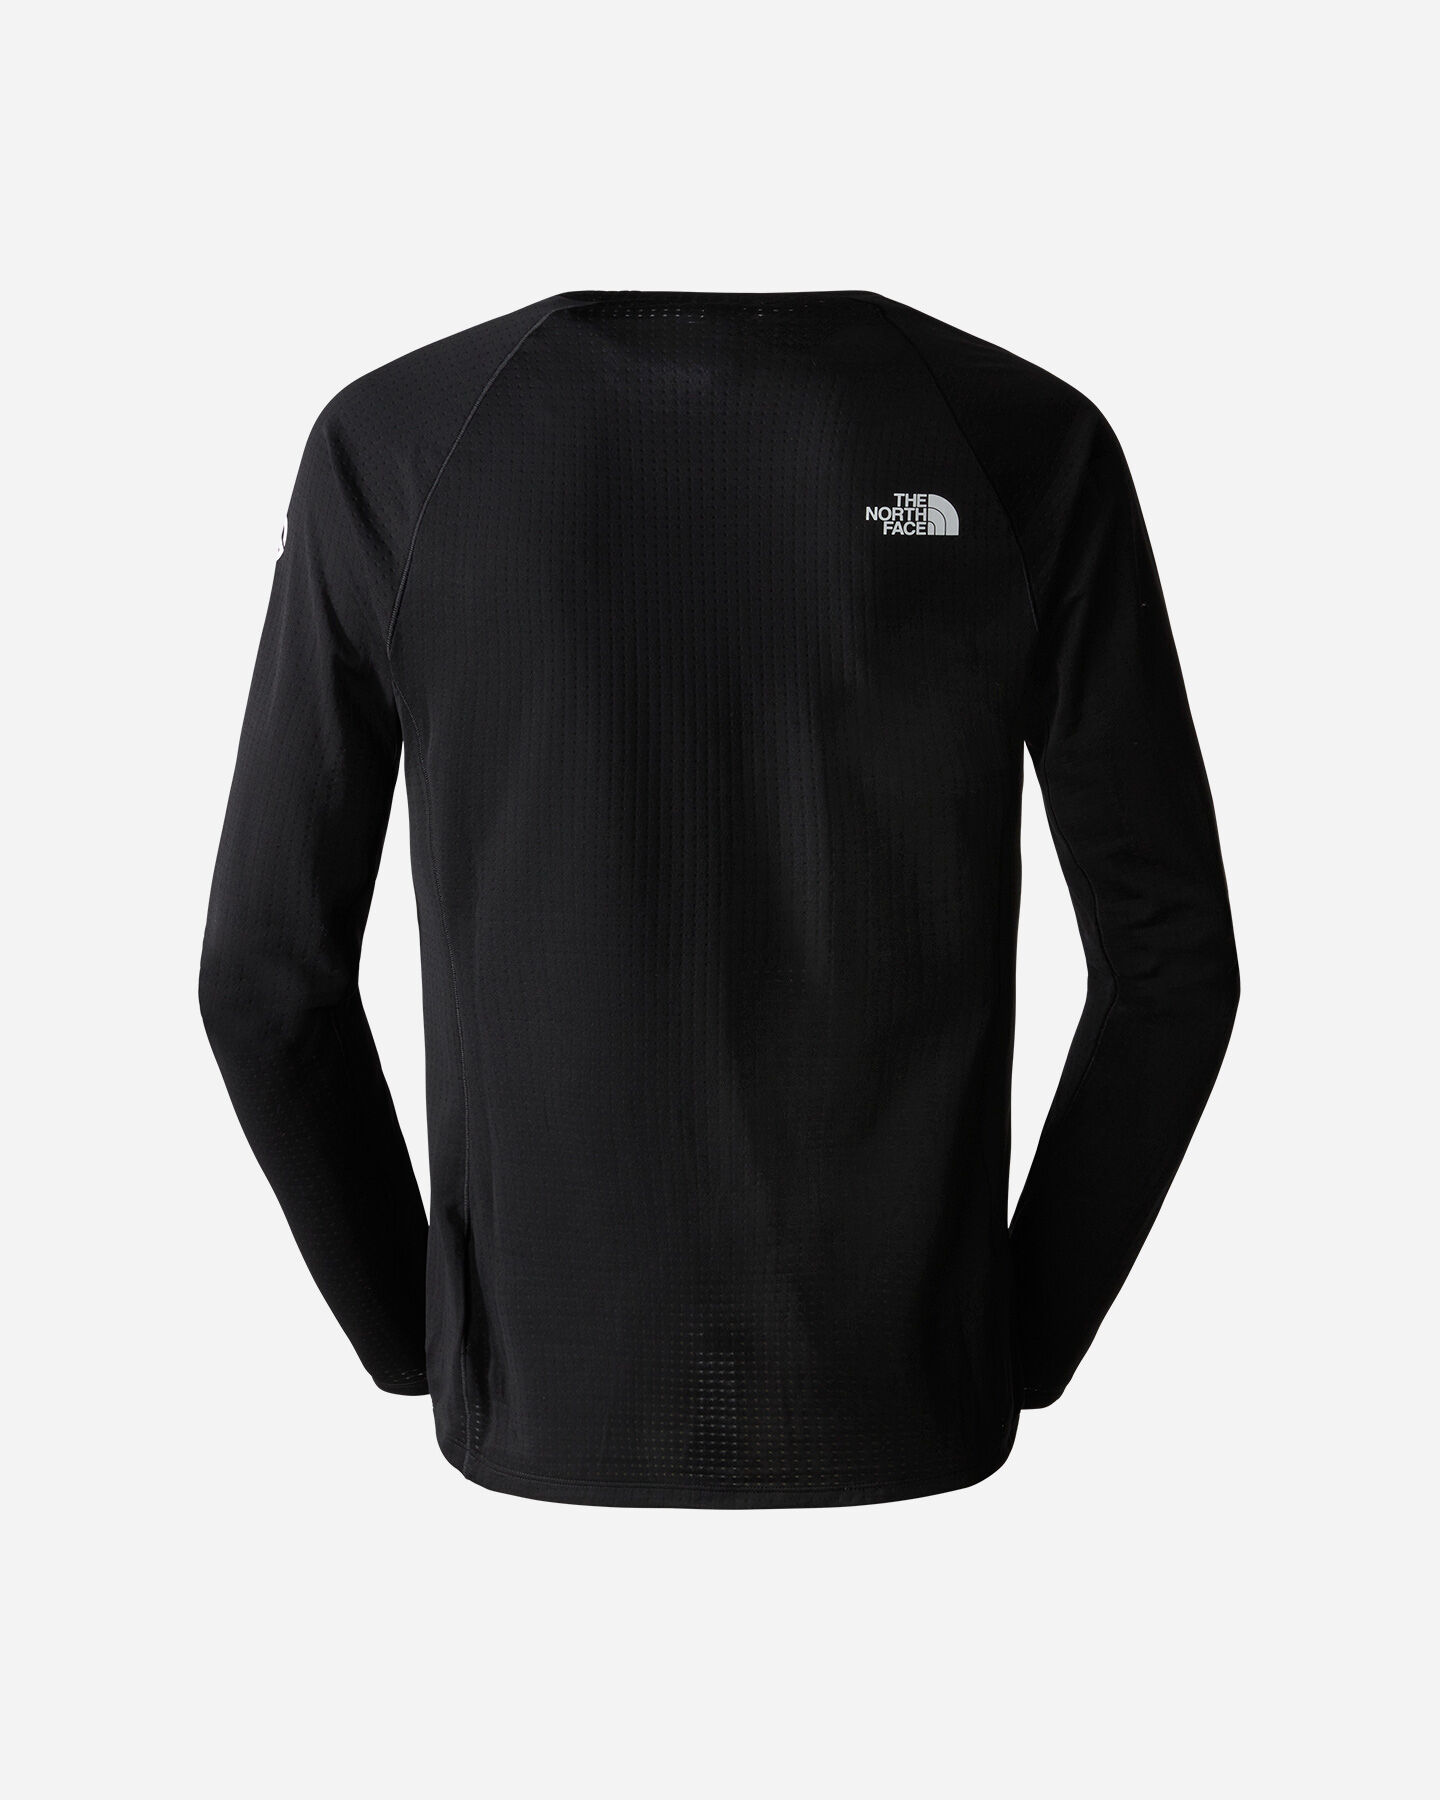  T-Shirt THE NORTH FACE SUMMIT PRO 120 M S5598723|KX7|S scatto 1